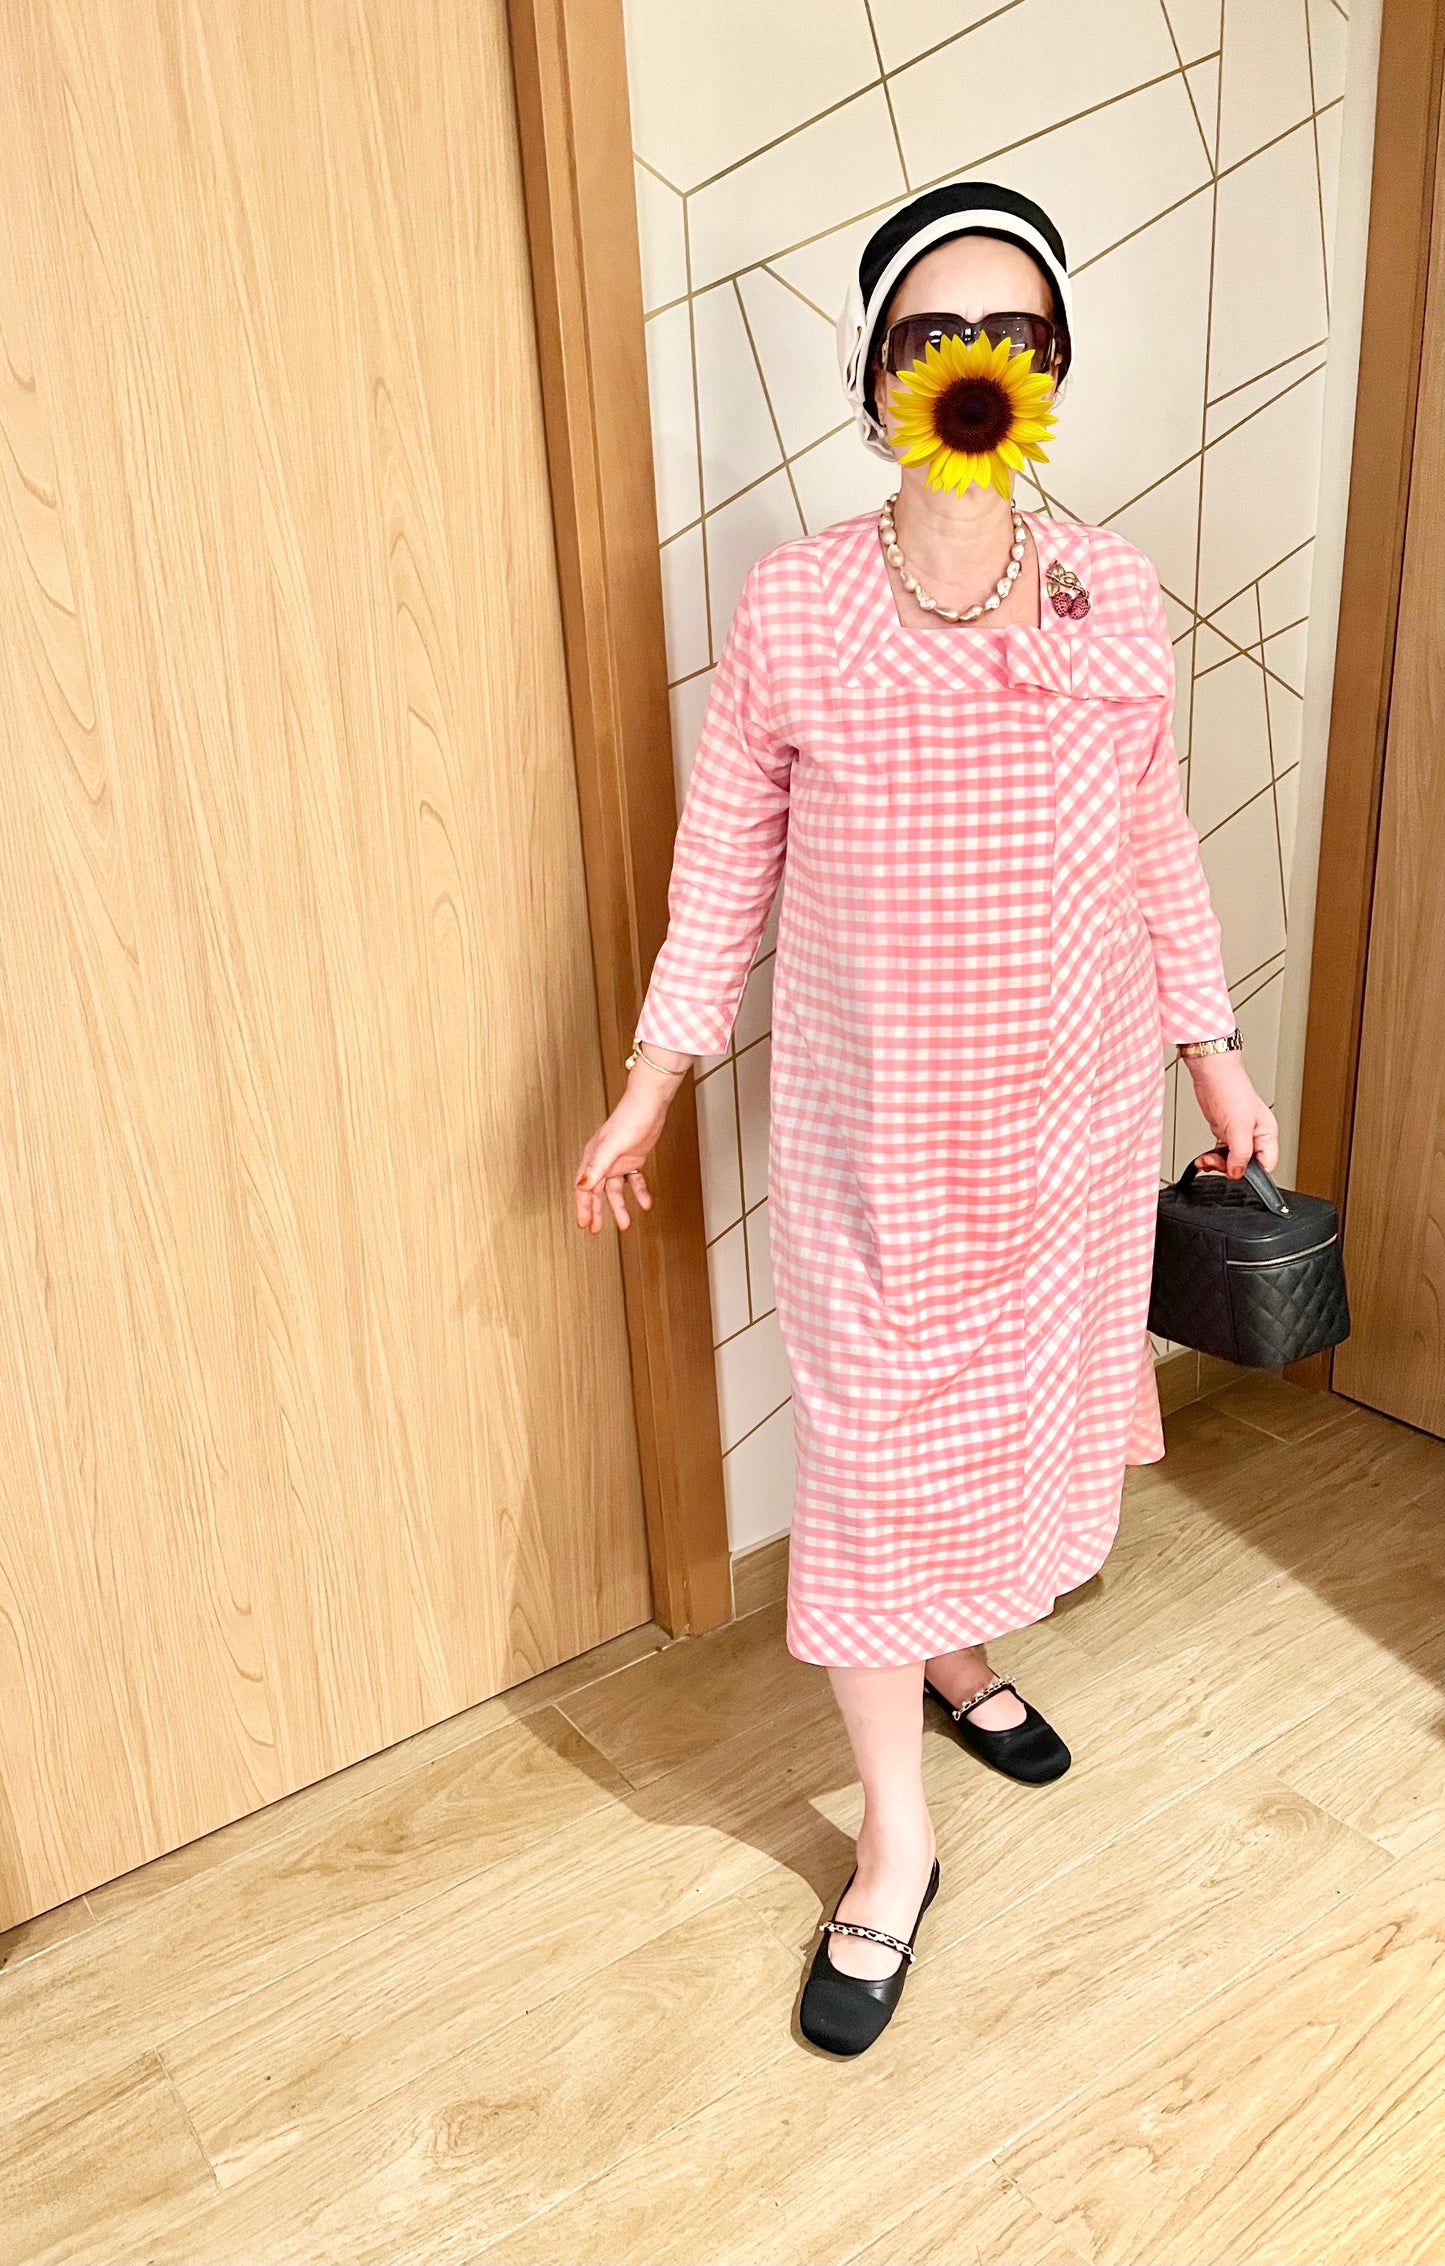 PRE-ORDER NEW: Pretty in pink gingham dress coat!